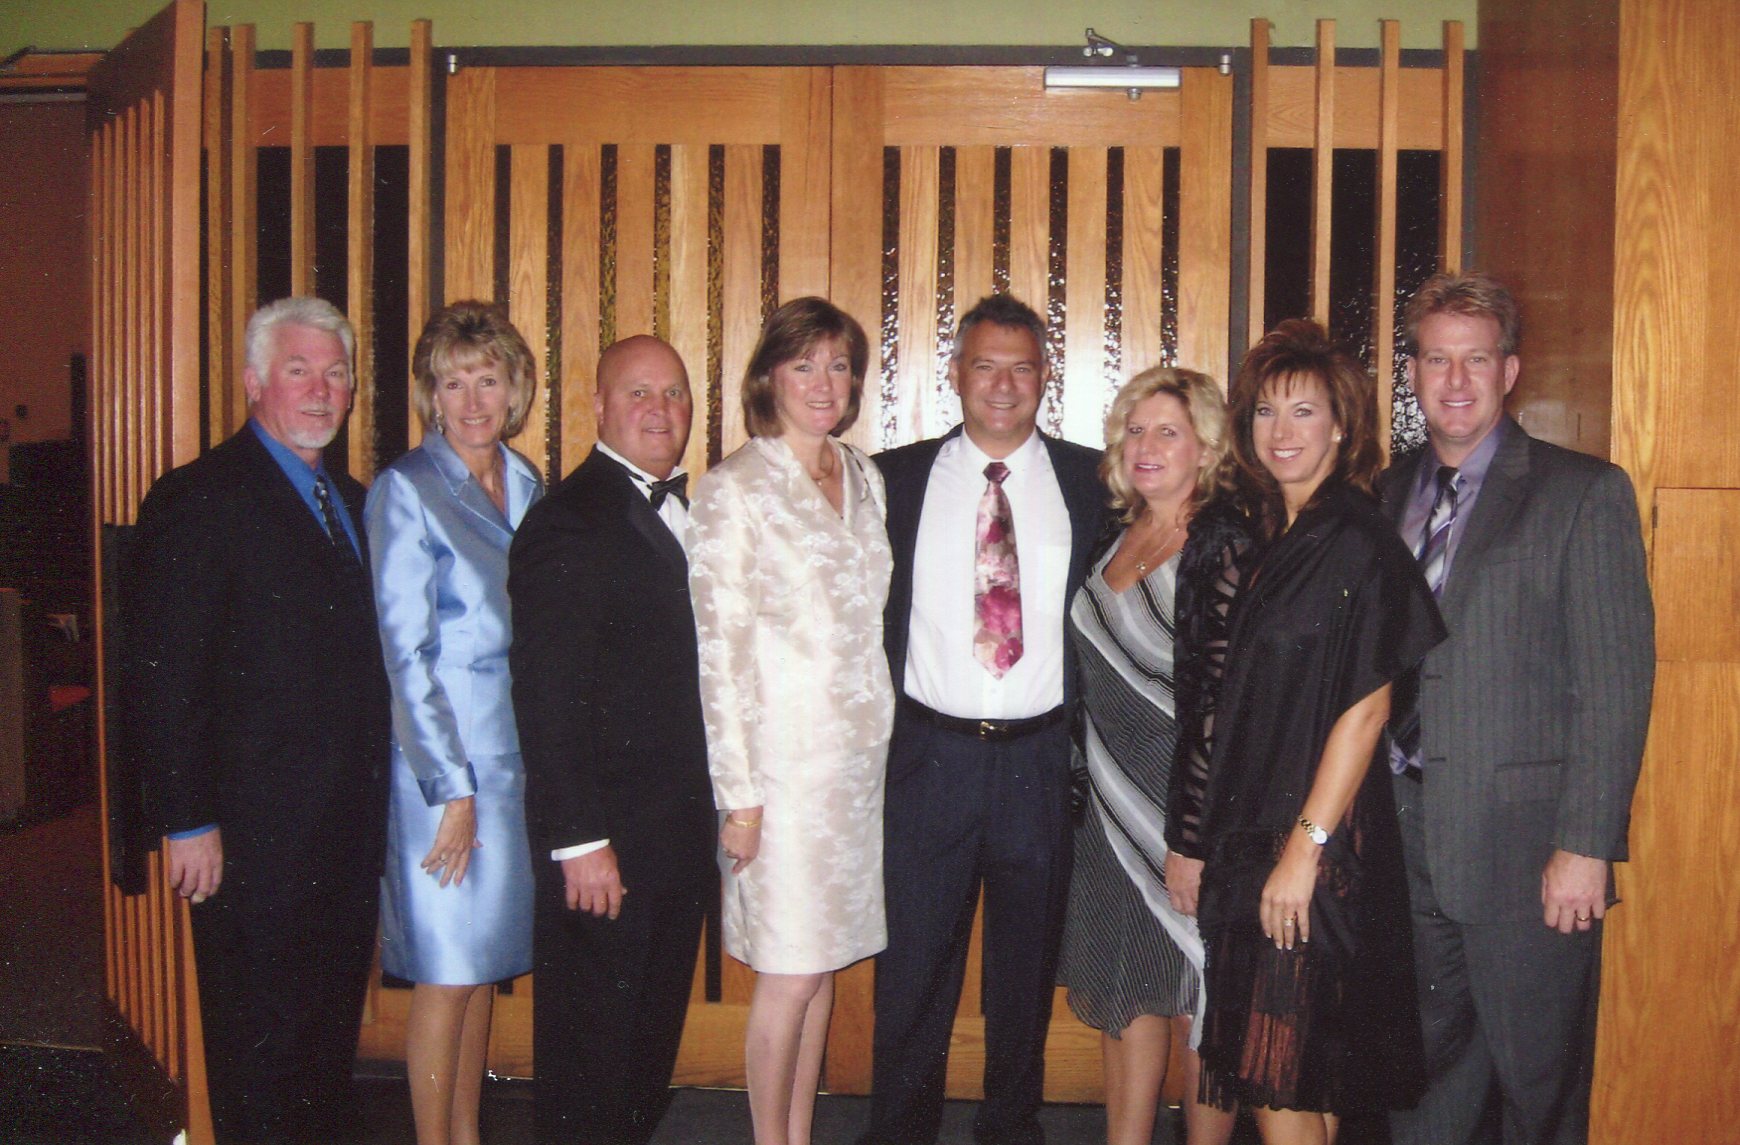 Inge and Kris with cousins Karen and Wendy and spouses and Janine and Joe at cousin Steve's wedding in Toronto Canada in 2006.